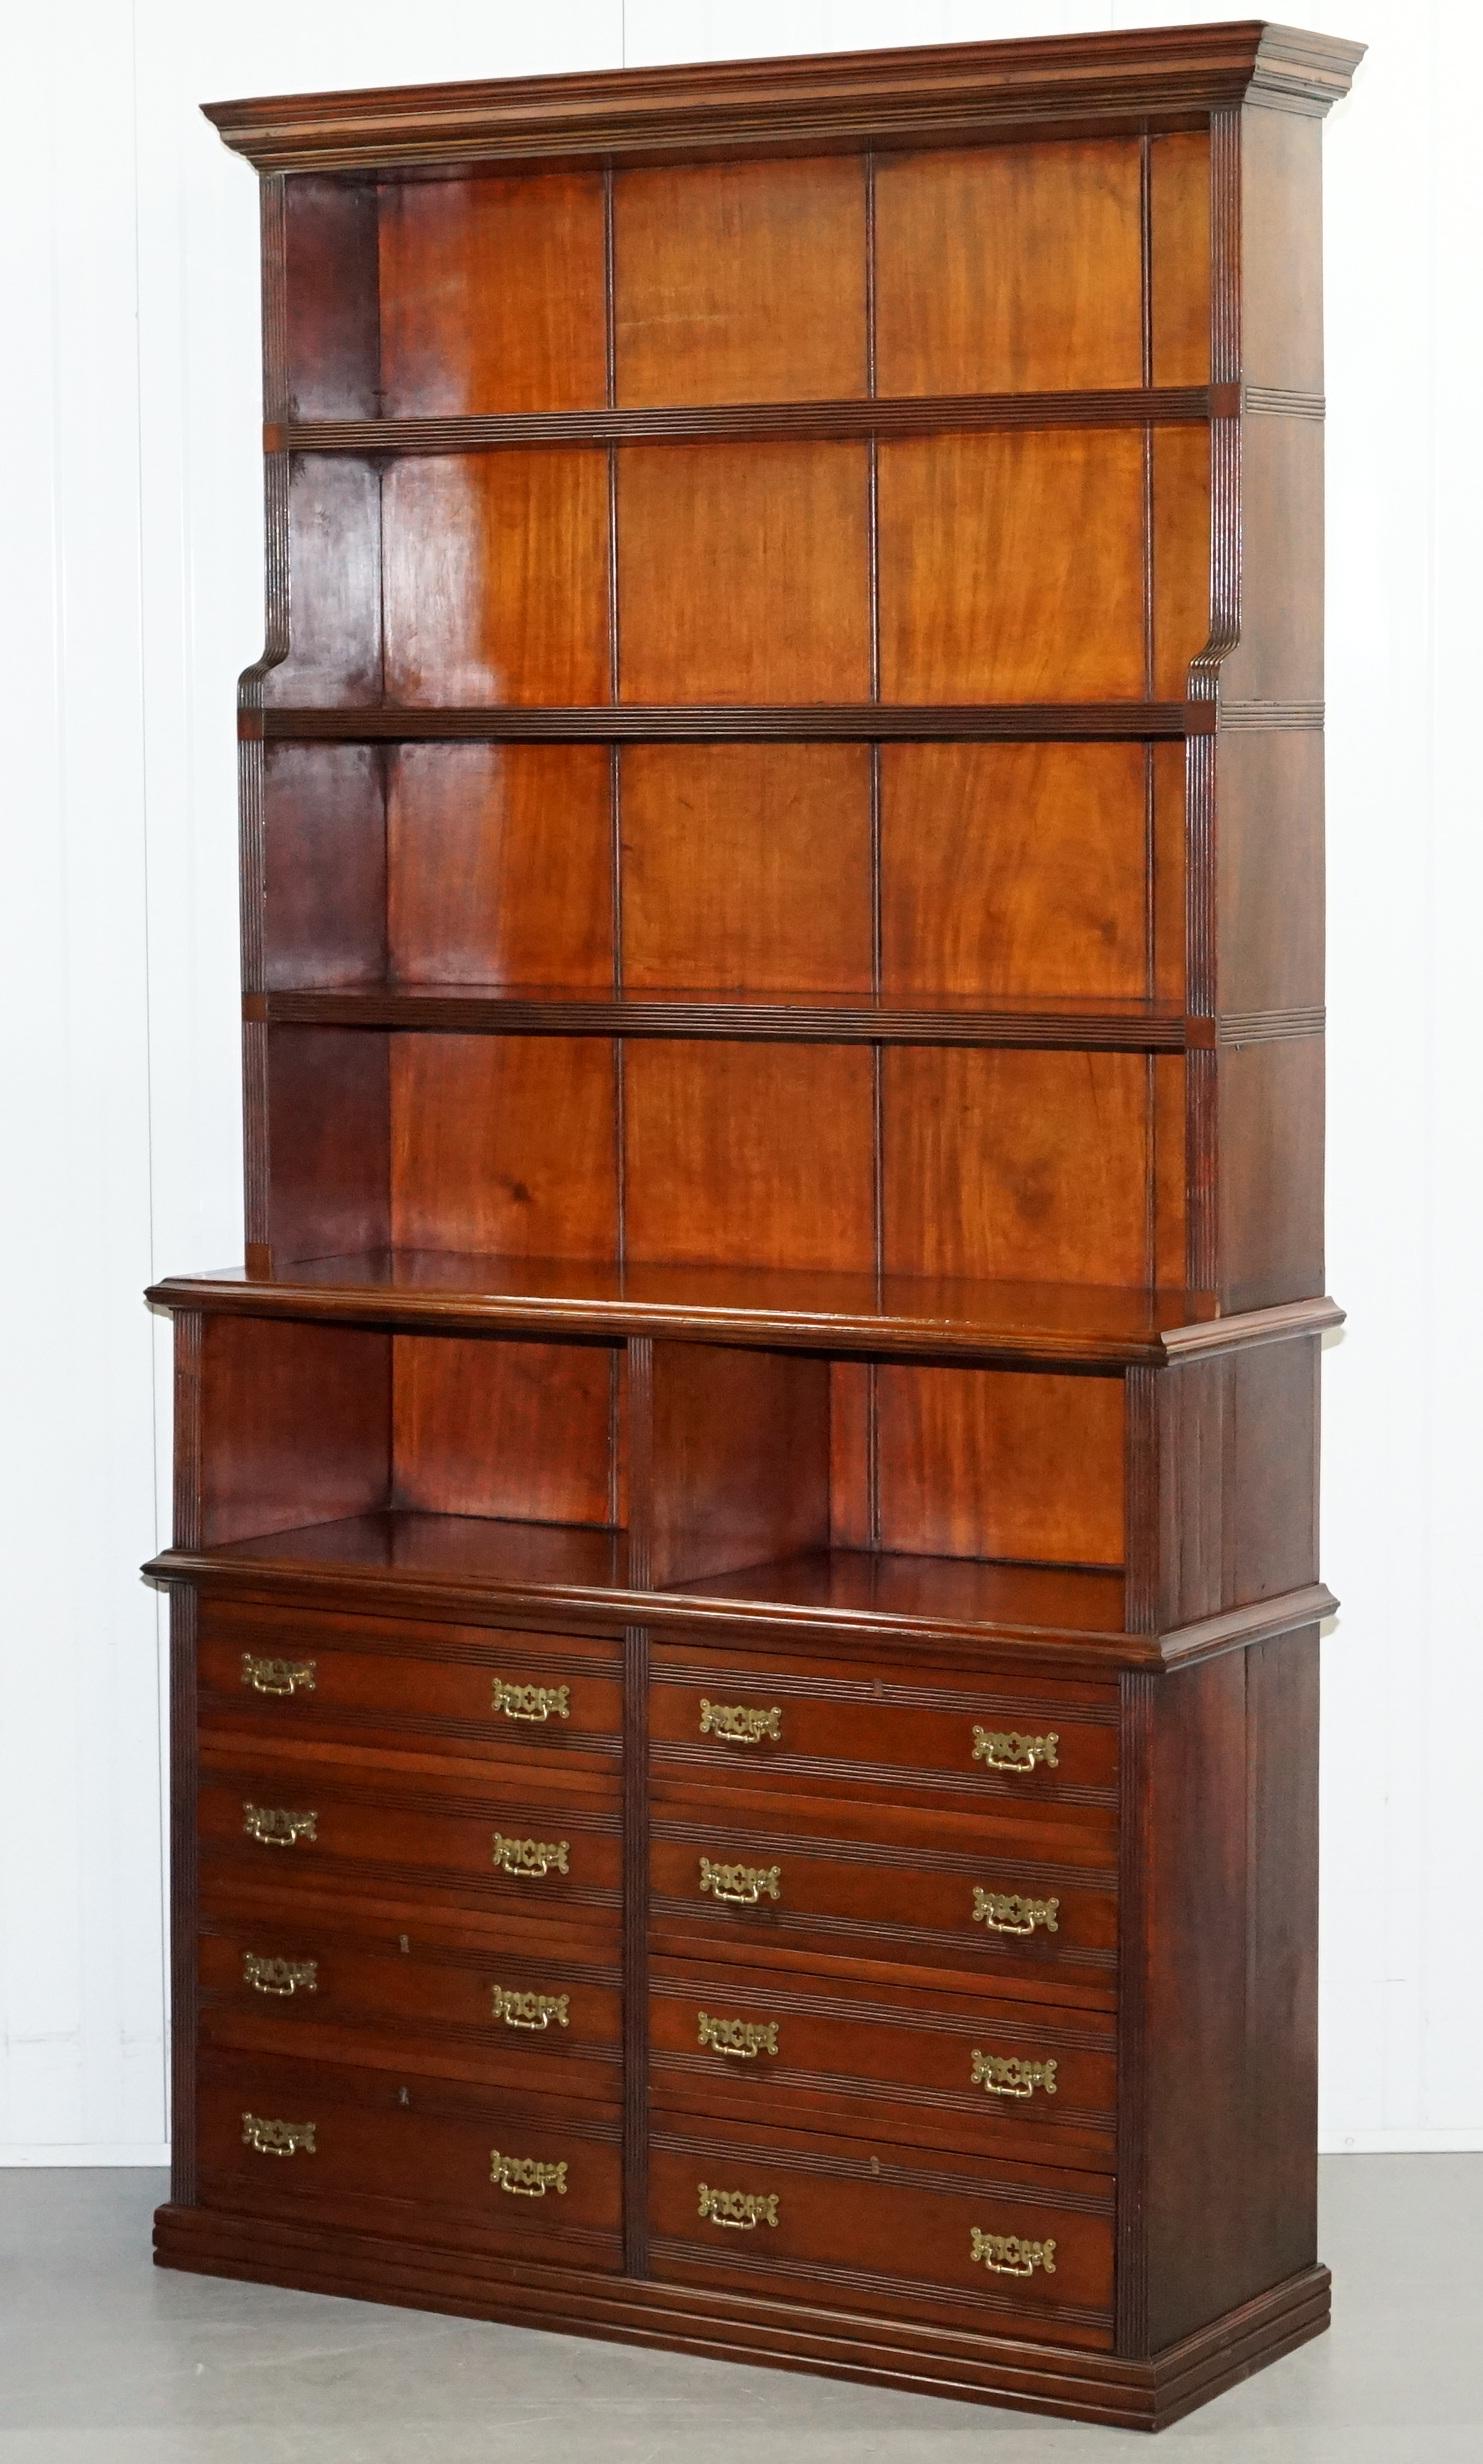 We are delighted to offer for sale this stunning pair of original solid Walnut Victorian Library waterfall bookcases with Haberdashery banks of drawers to the base

A truly stunning pair, very rare to find them in this timber from this period and